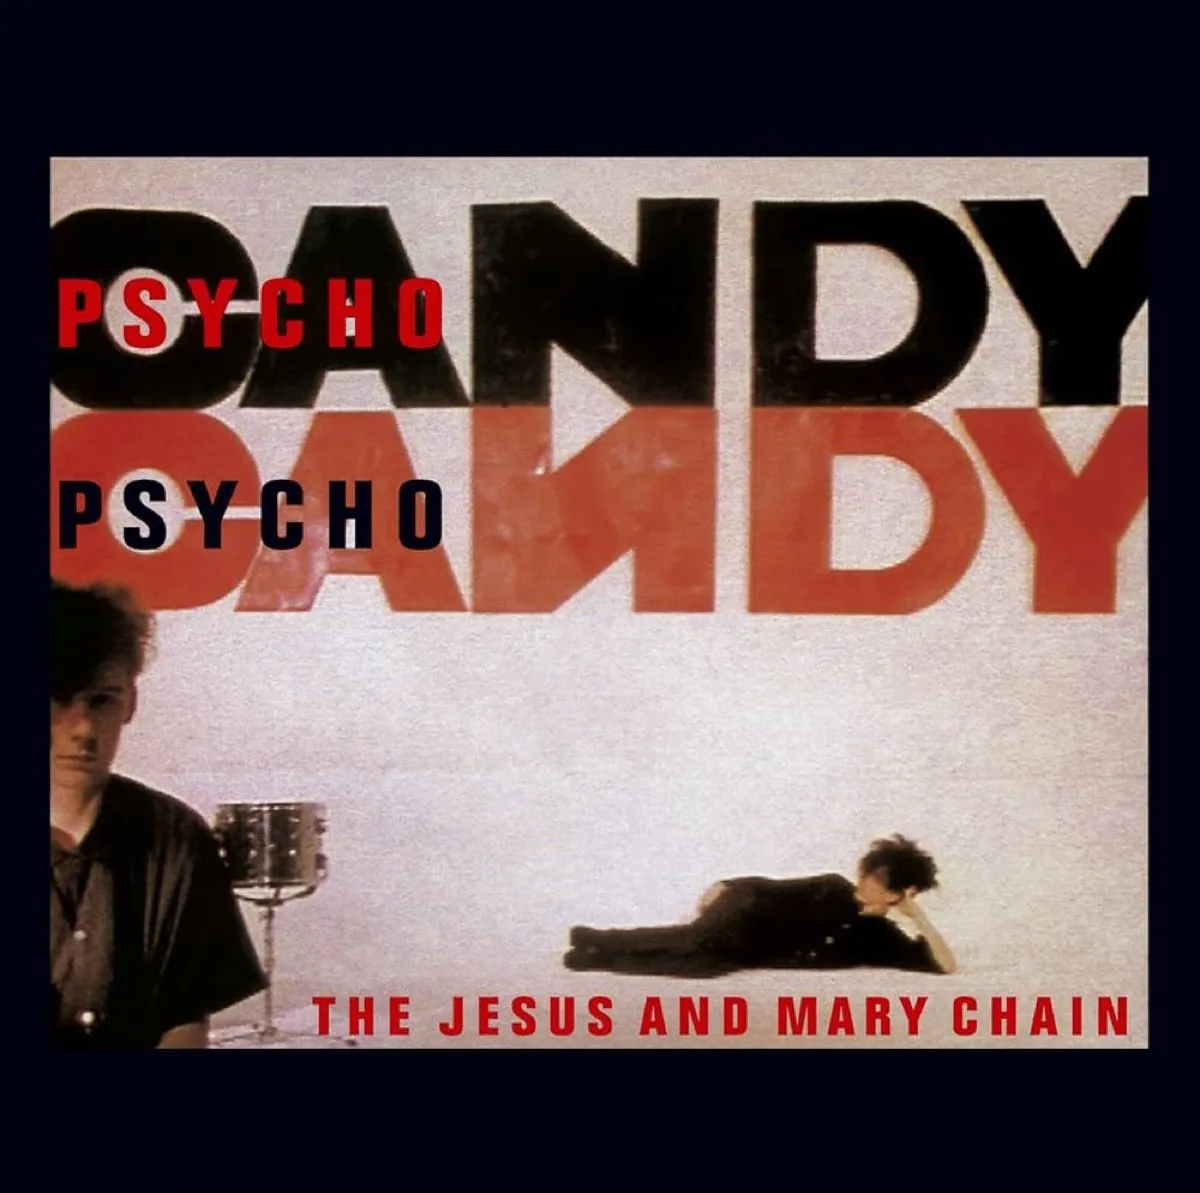 Psychocandy by The Jesus and Mary Chain album cover